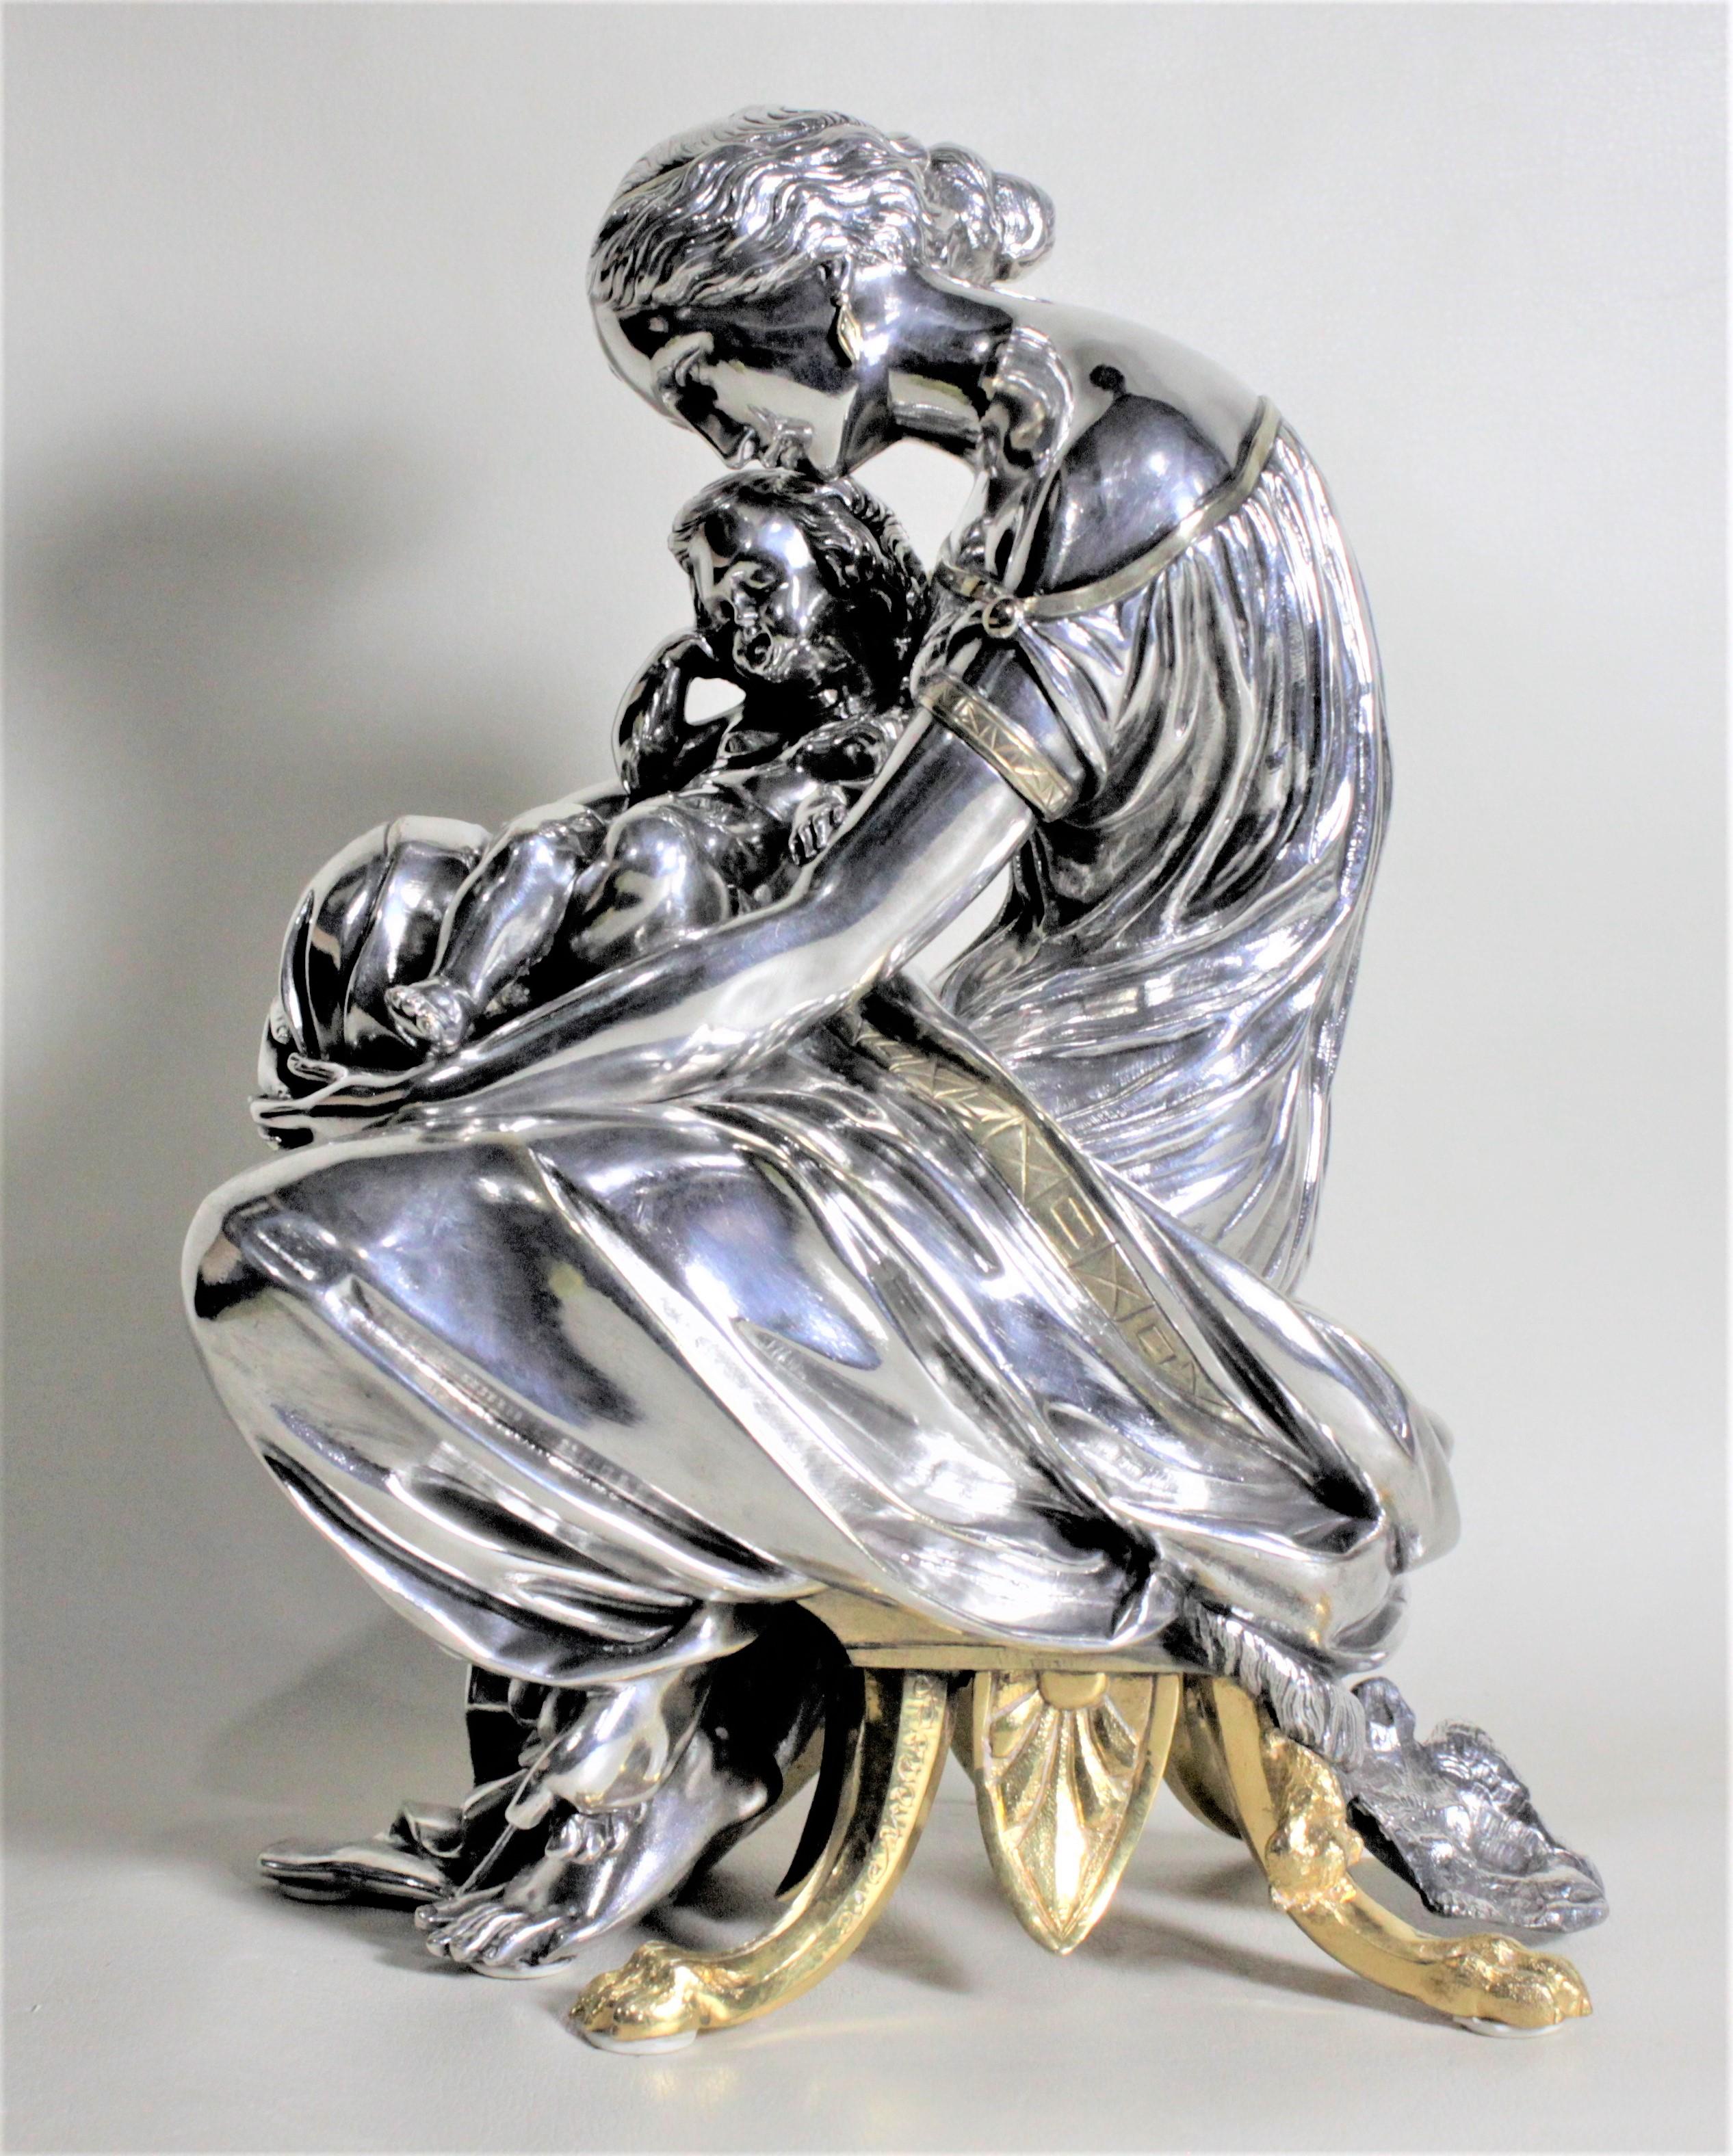 This well executed bronze sculpture depicting a mother seated holding her baby was presumed to have been made in France in circa 1900. This bronze has been heavily silvered giving it an almost chromed appearance with additional gilt accenting to the